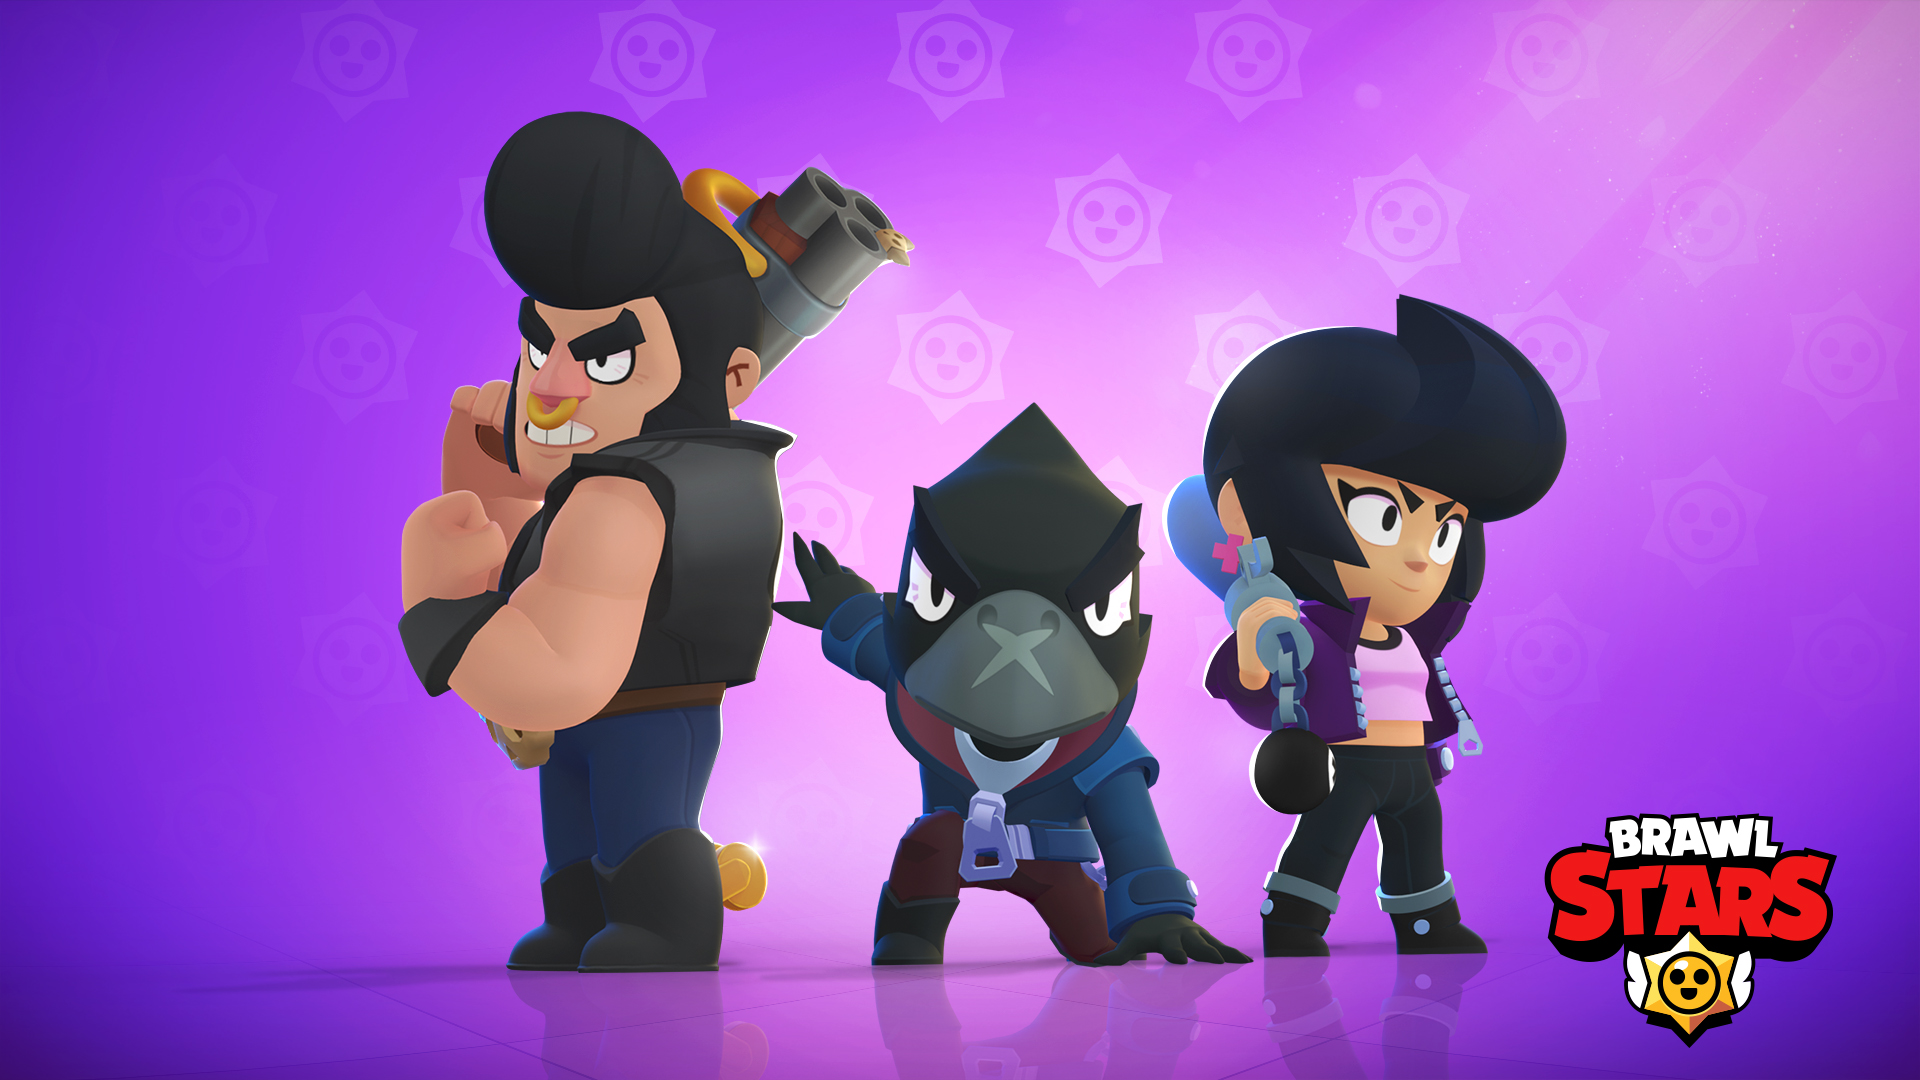 Brawl Stars Sur Twitter We Know Playing With Randoms Can Be Tough Sometimes So How About Trying Something Different Today Comment Below 1 Your Total Trophies 2 - serveur privé brawl stars a cree